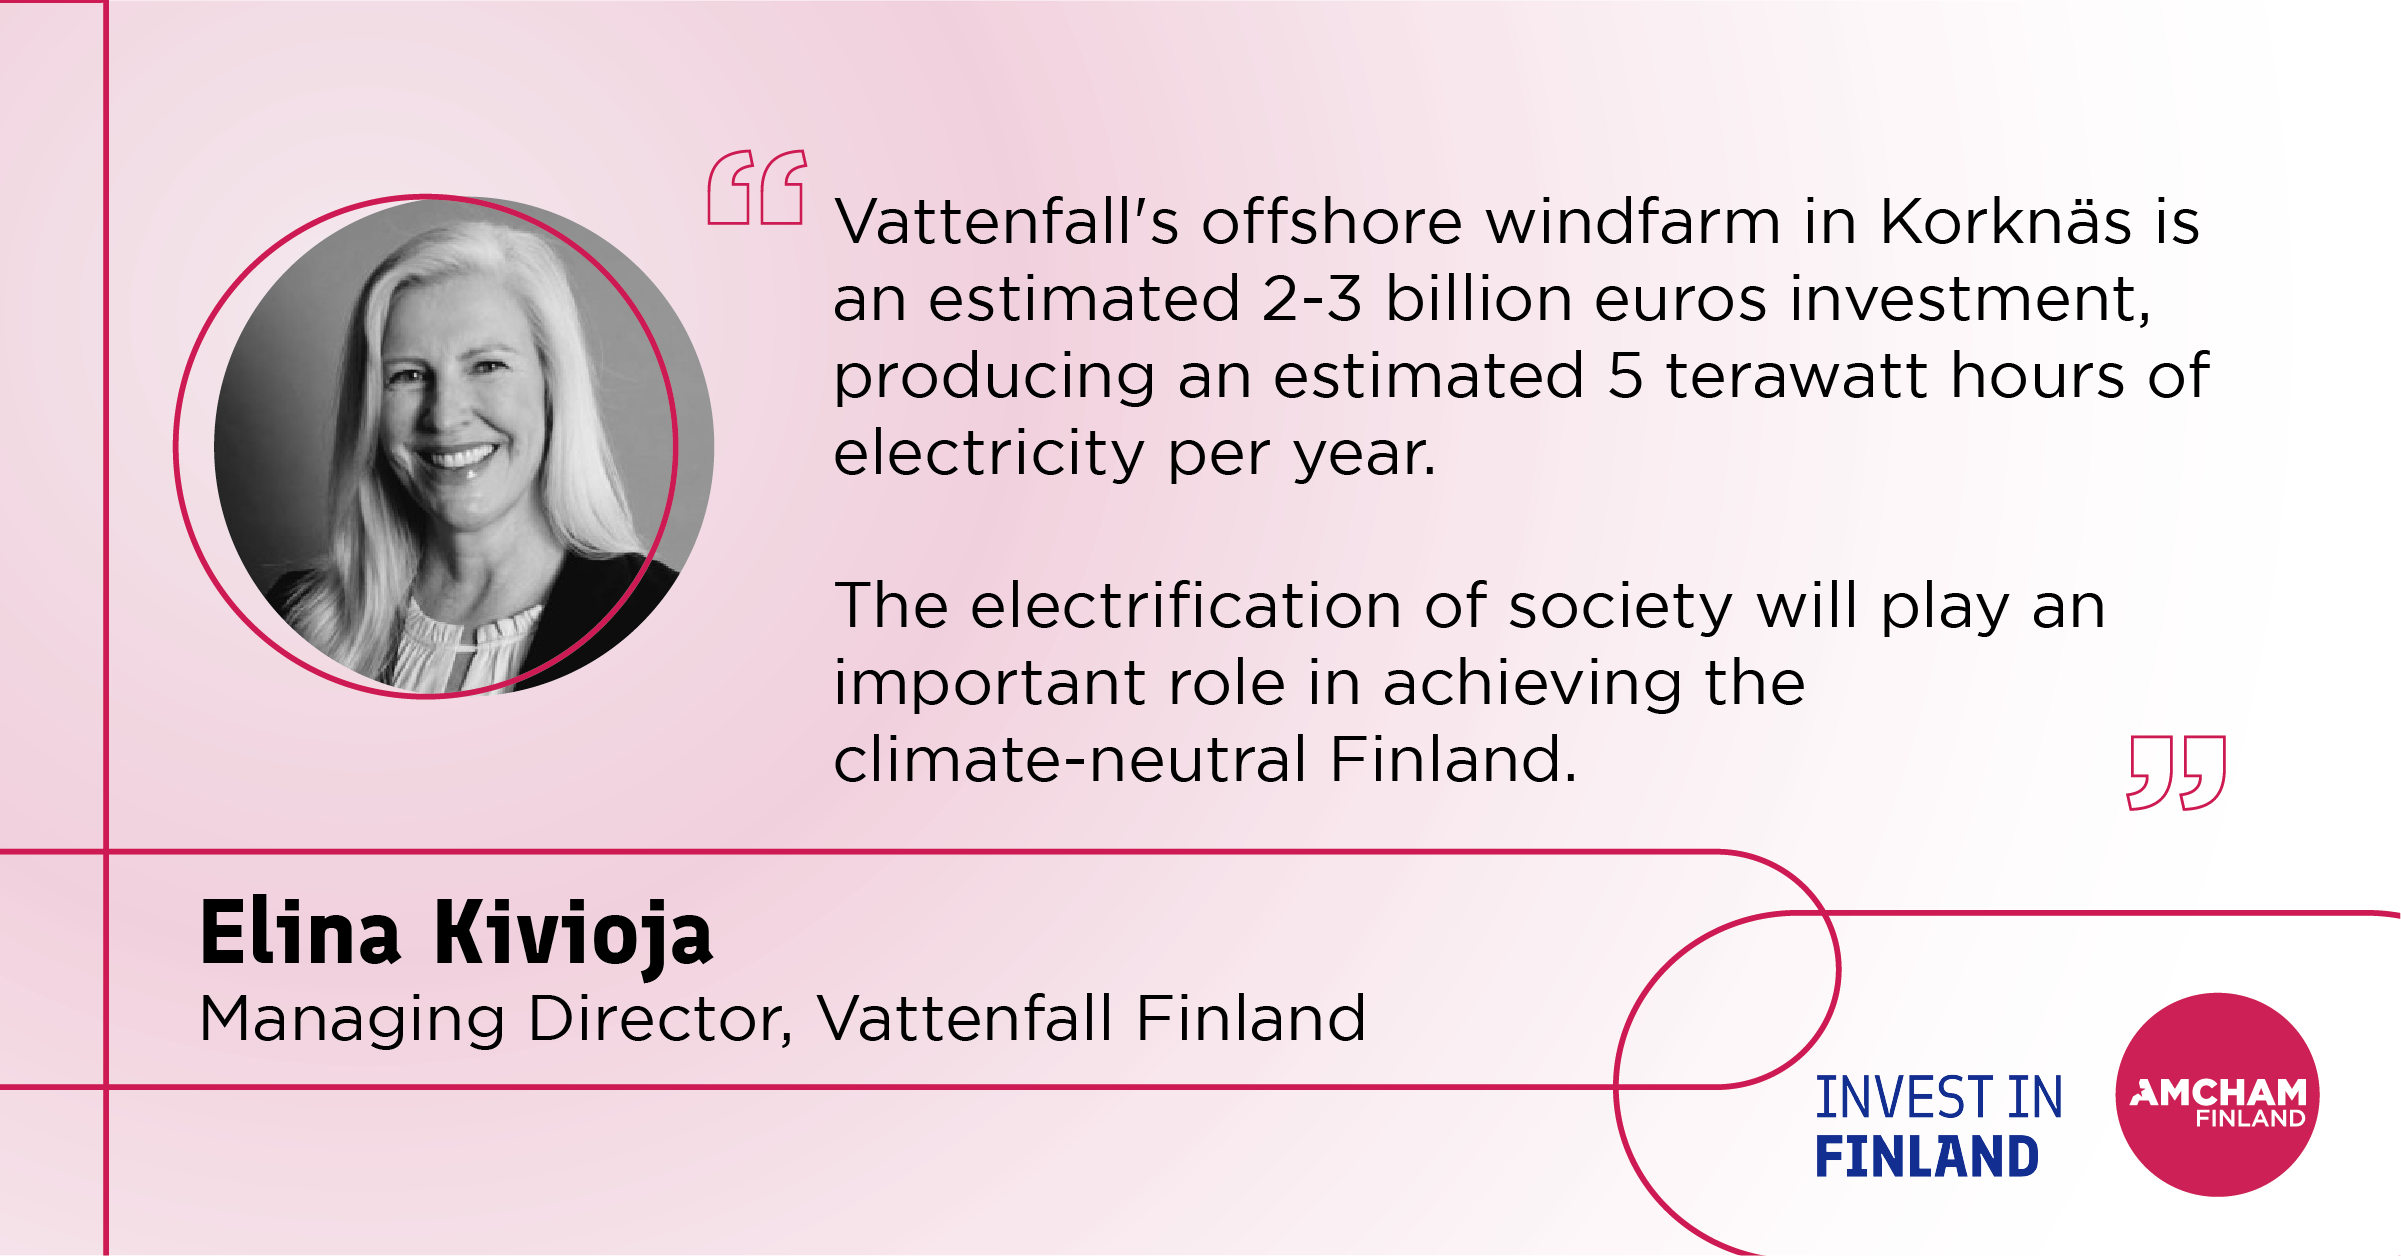 Quote by Elina Kivioja, Managing Director of Vattenfall Finland